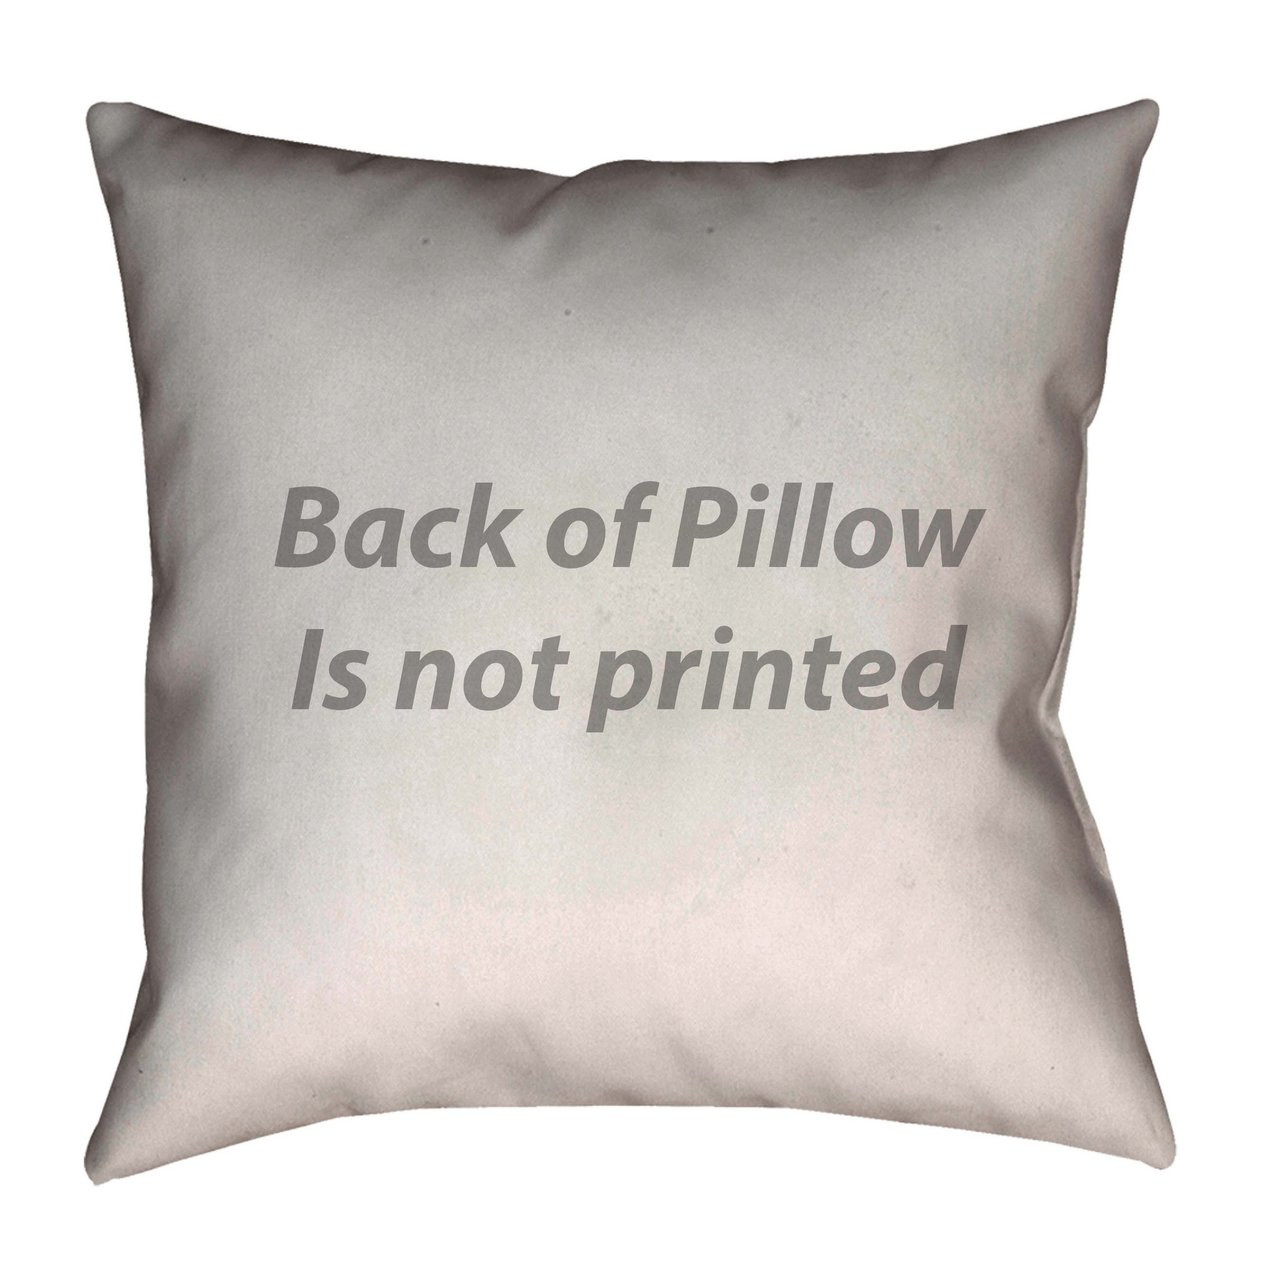 https://cdn11.bigcommerce.com/s-g76ppqd2vb/images/stencil/1280x1280/products/3986/9203/back_of_pillow_8afd449a-af89-4040-9b67-314faa05a4bc__41876.1540585648.jpg?c=2